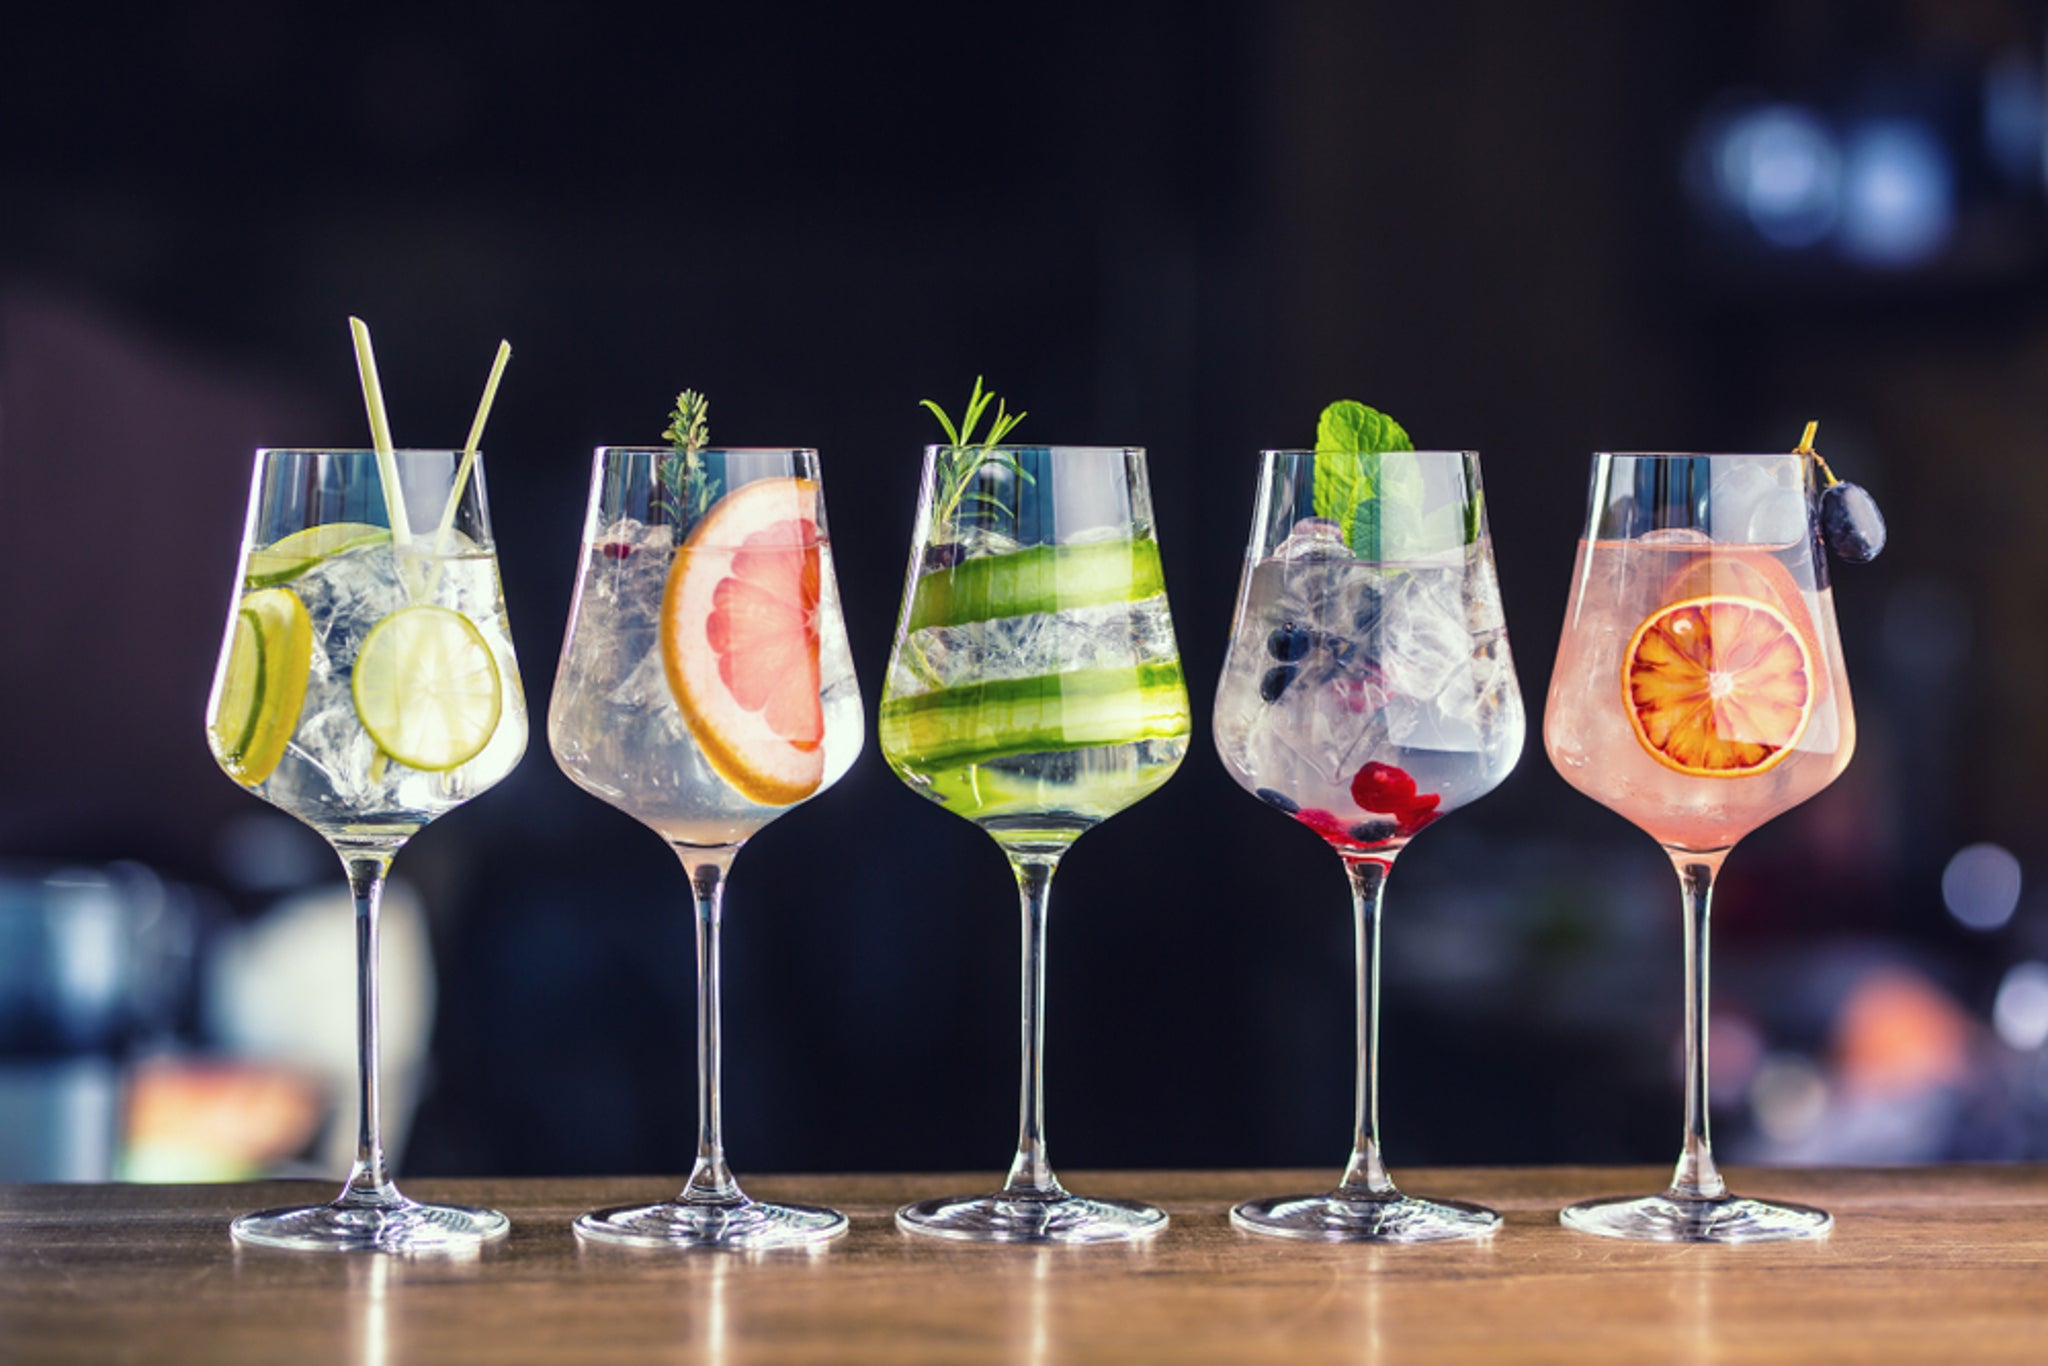 Martinis, G &ts, Negroni: How To Pick The Perfect Gin, However You Drink It photo